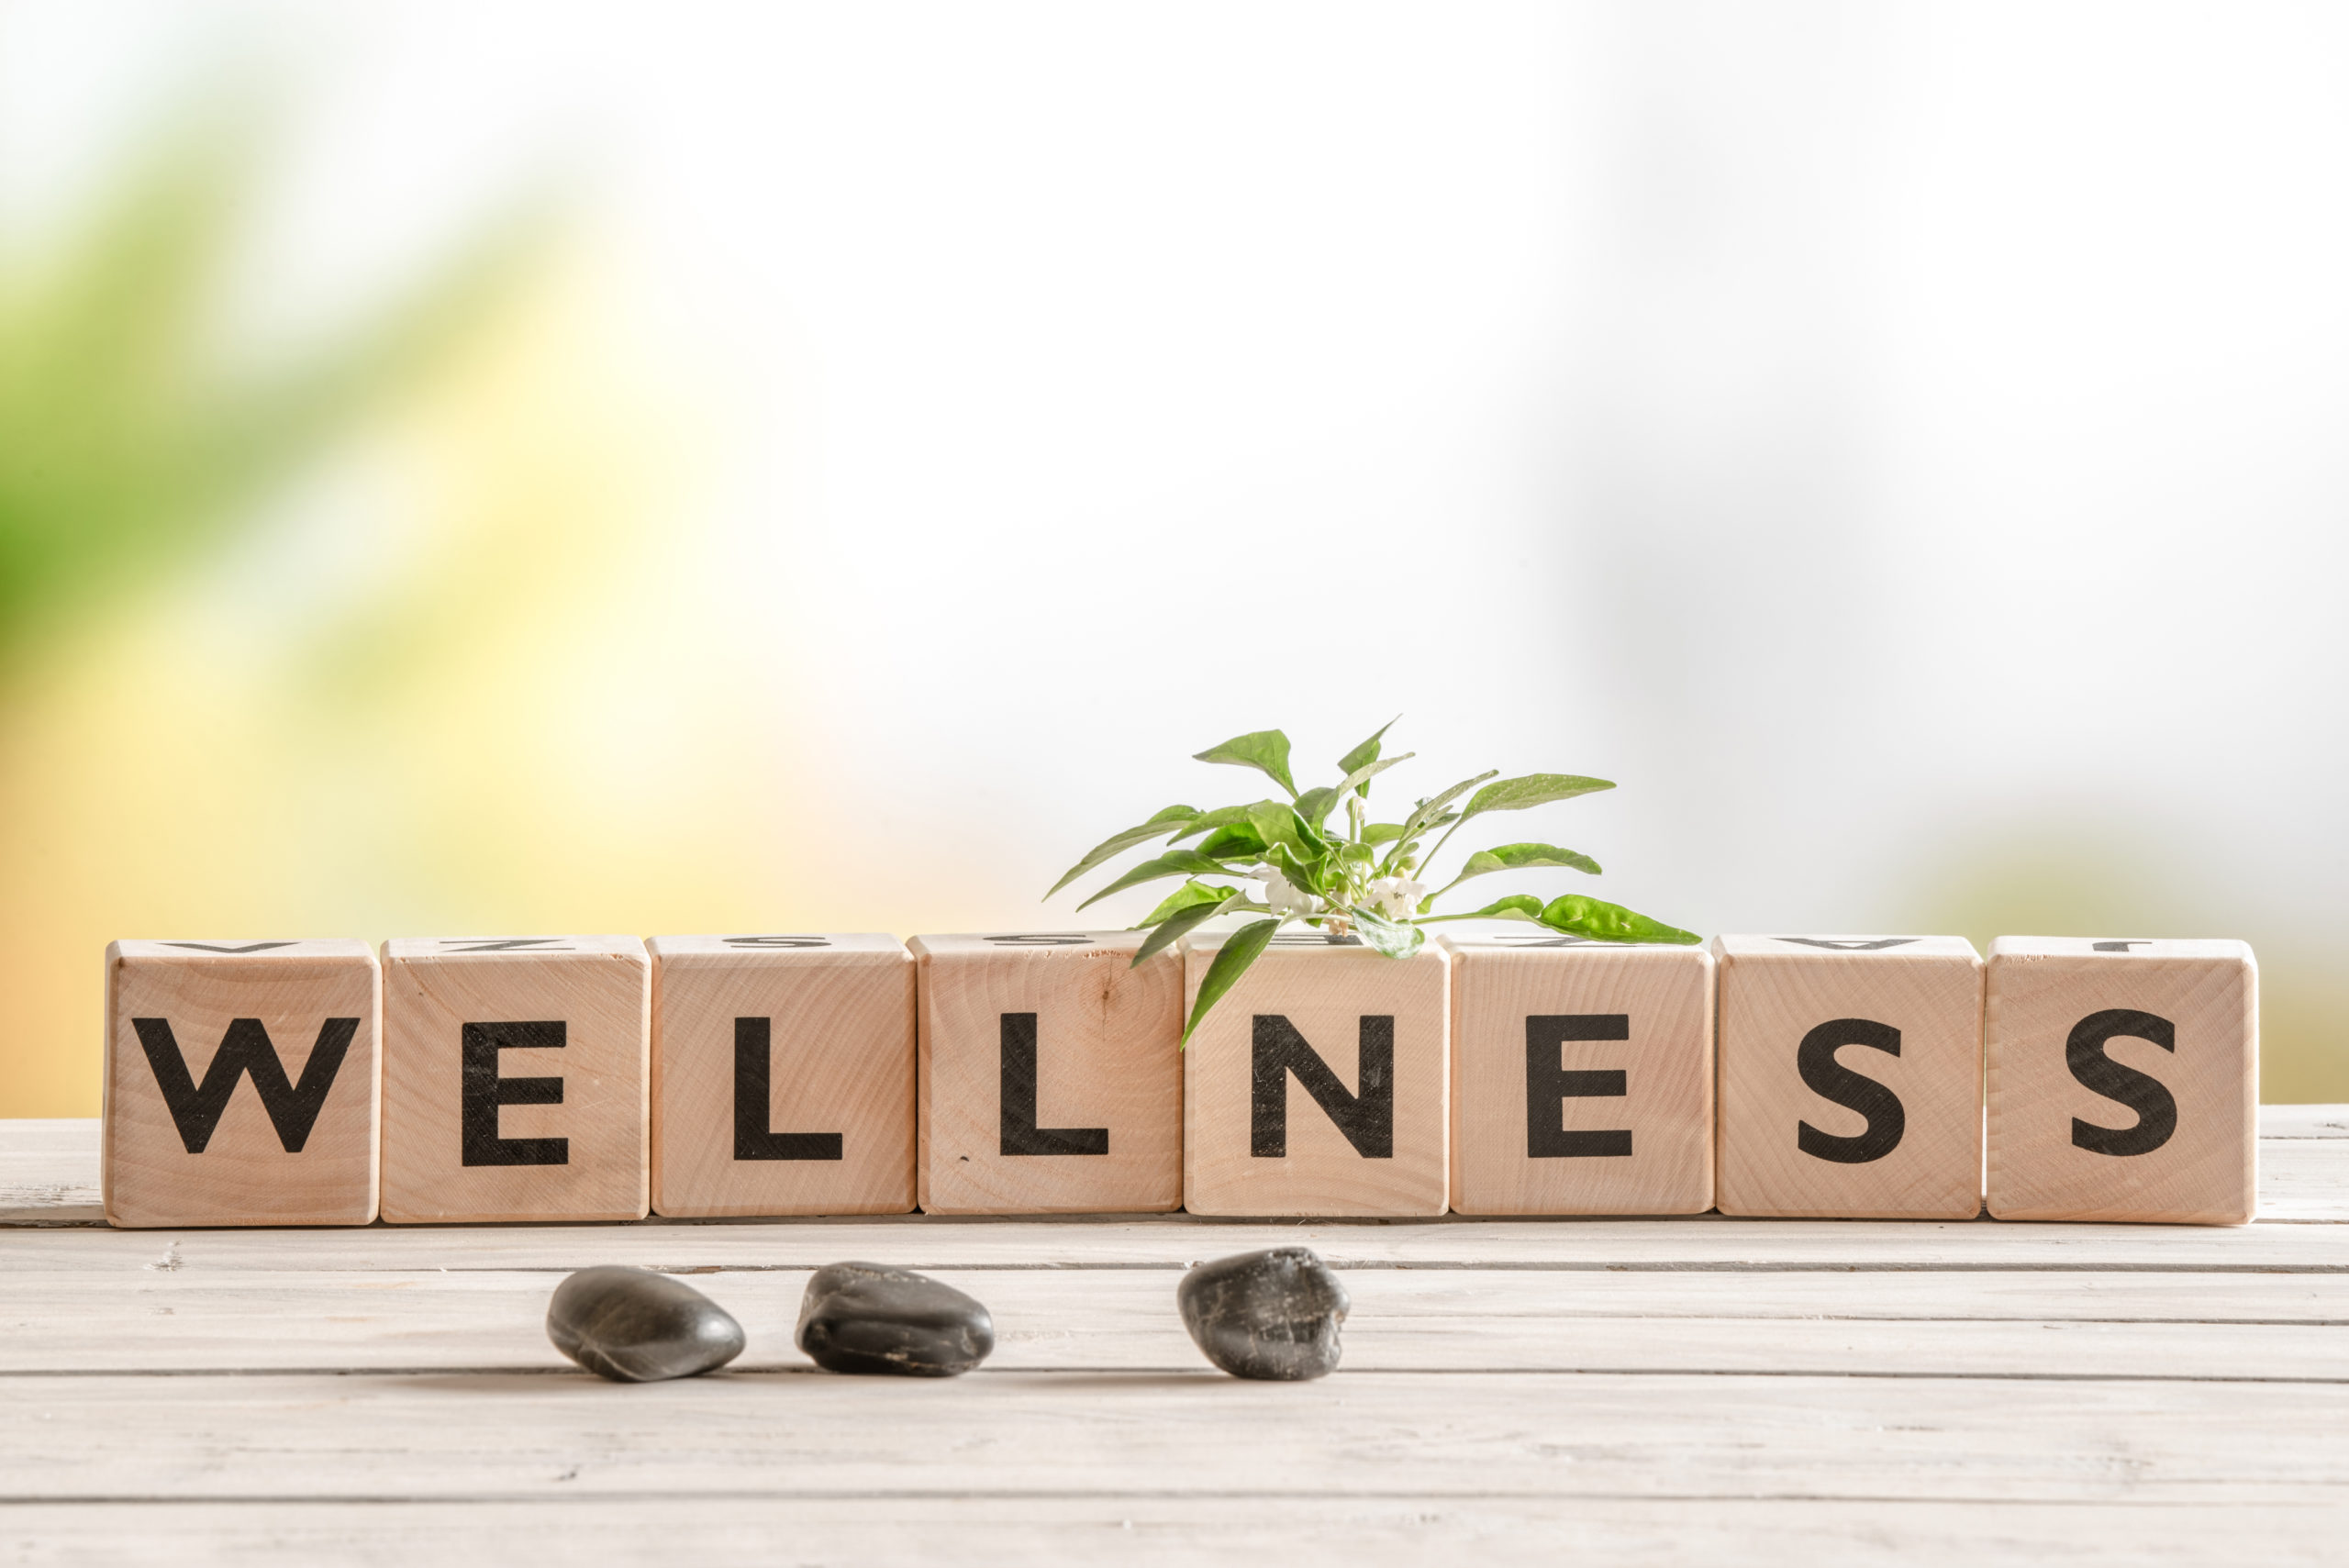 Wooden blocks lined up to spell WELLNESS in black text, three rocks and green foliage featured